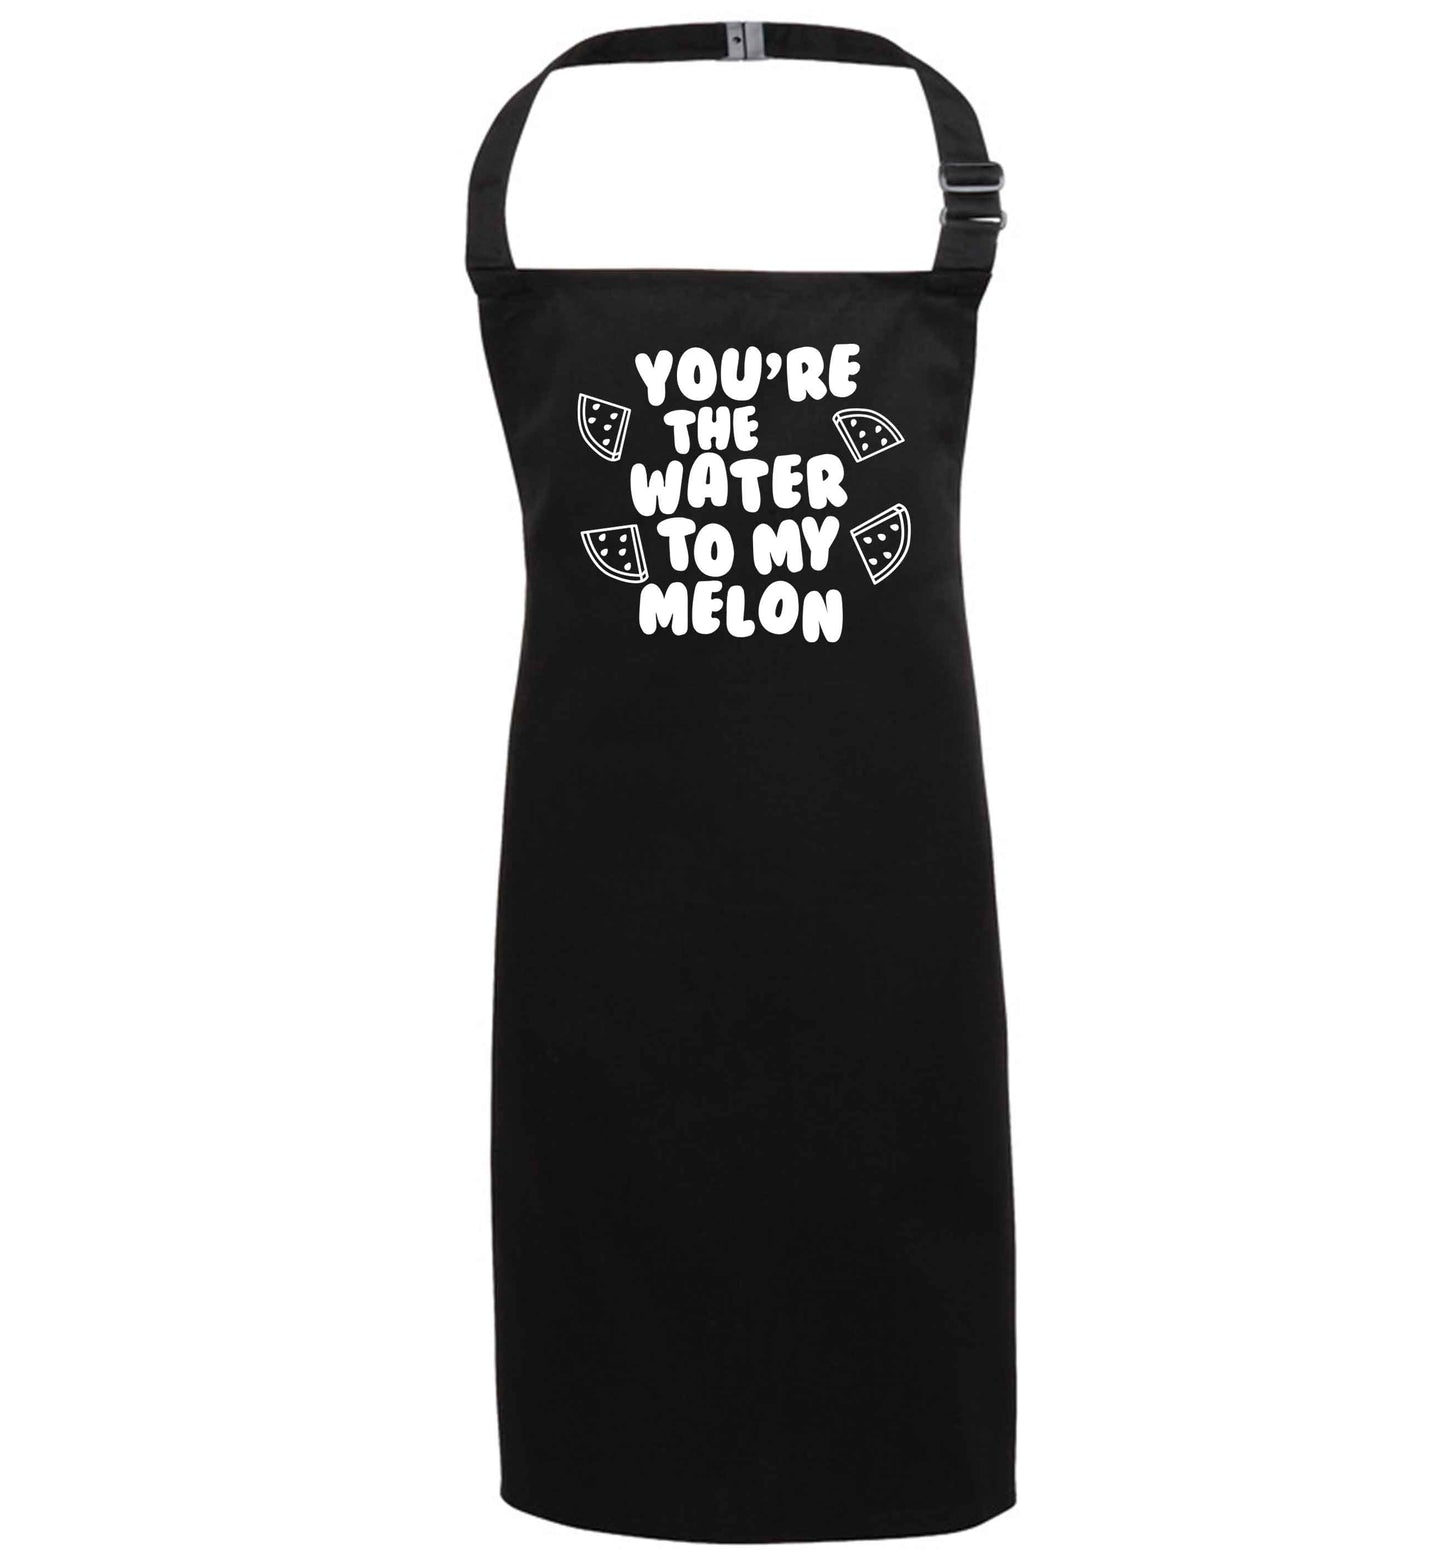 You're the water to my melon black apron 7-10 years